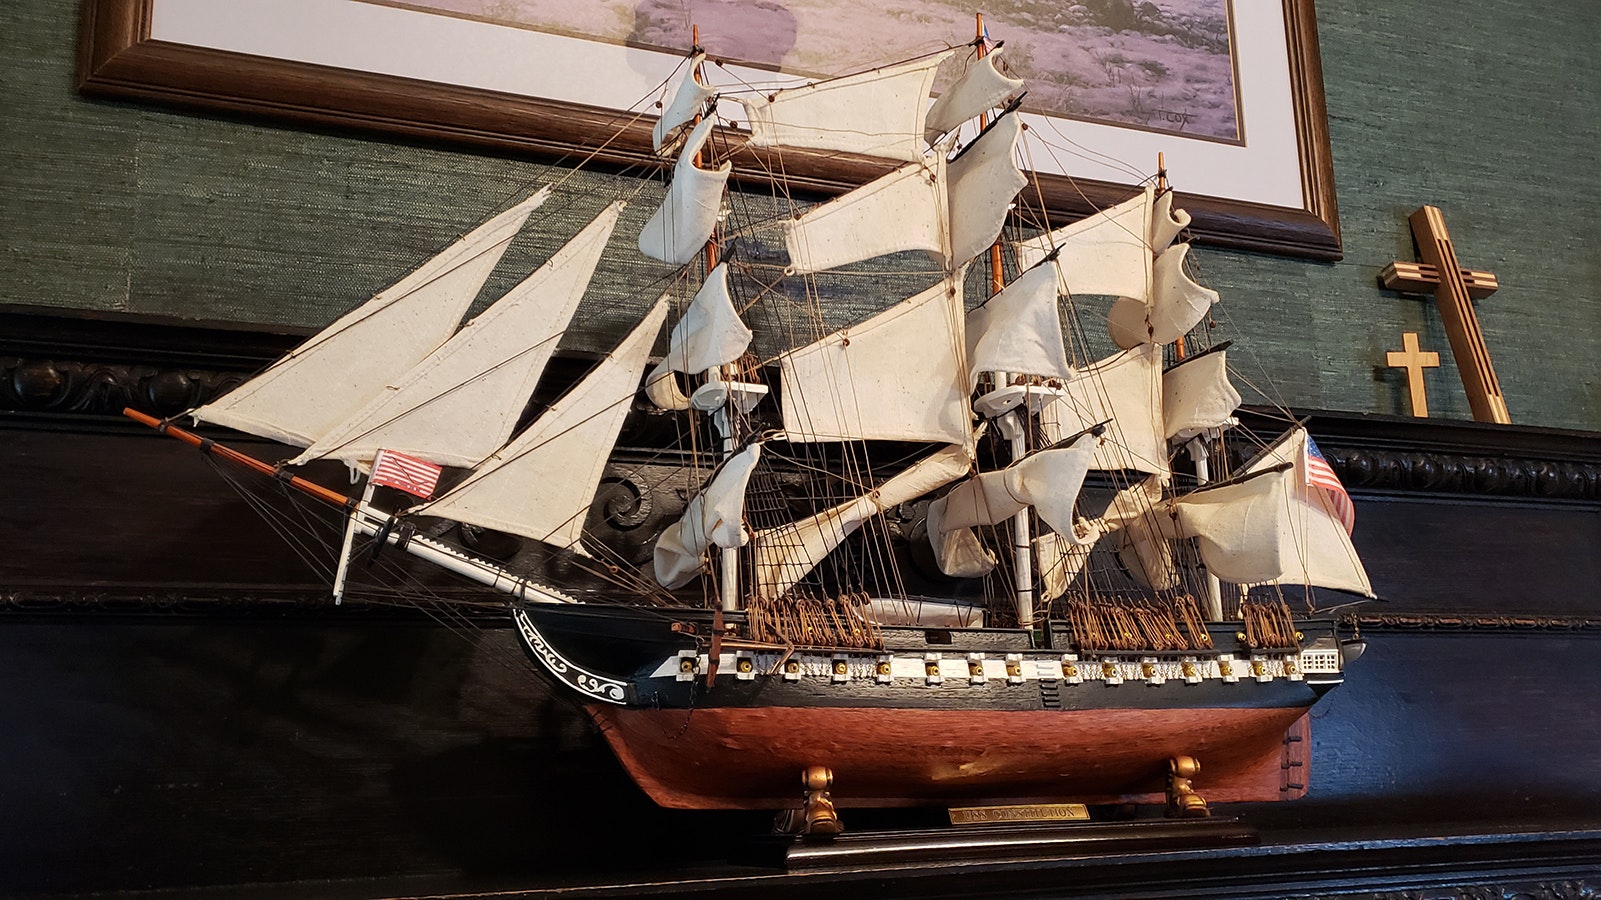 Zane Fross found this old Ironsides replica and bought it to display on a mantle of one of the many fireplaces in the J.B. Okie Mansion, because the house "just begs for art."